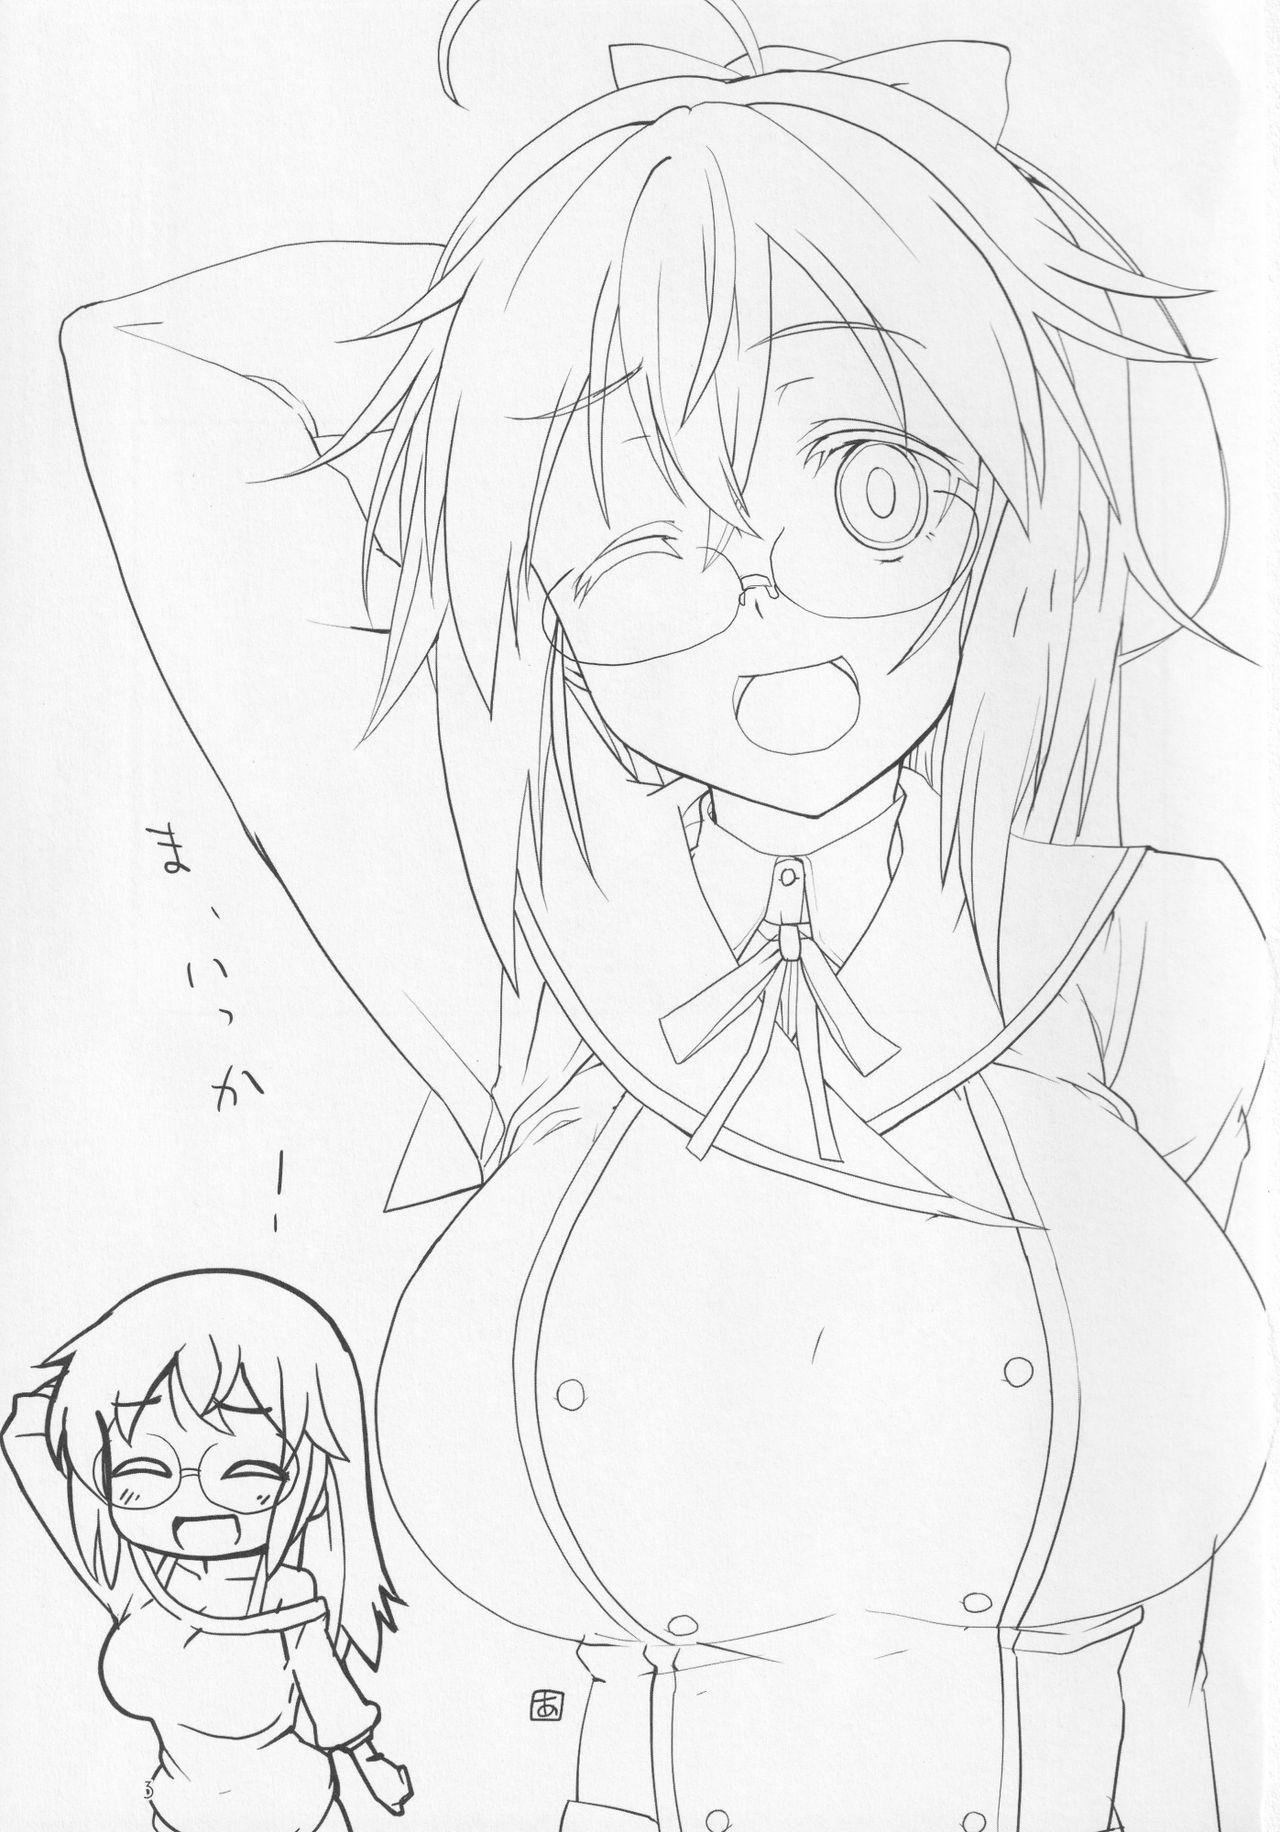 Muscles Ma Ikka! - Alice gear aegis Frame arms girl Clothed Sex - Page 2